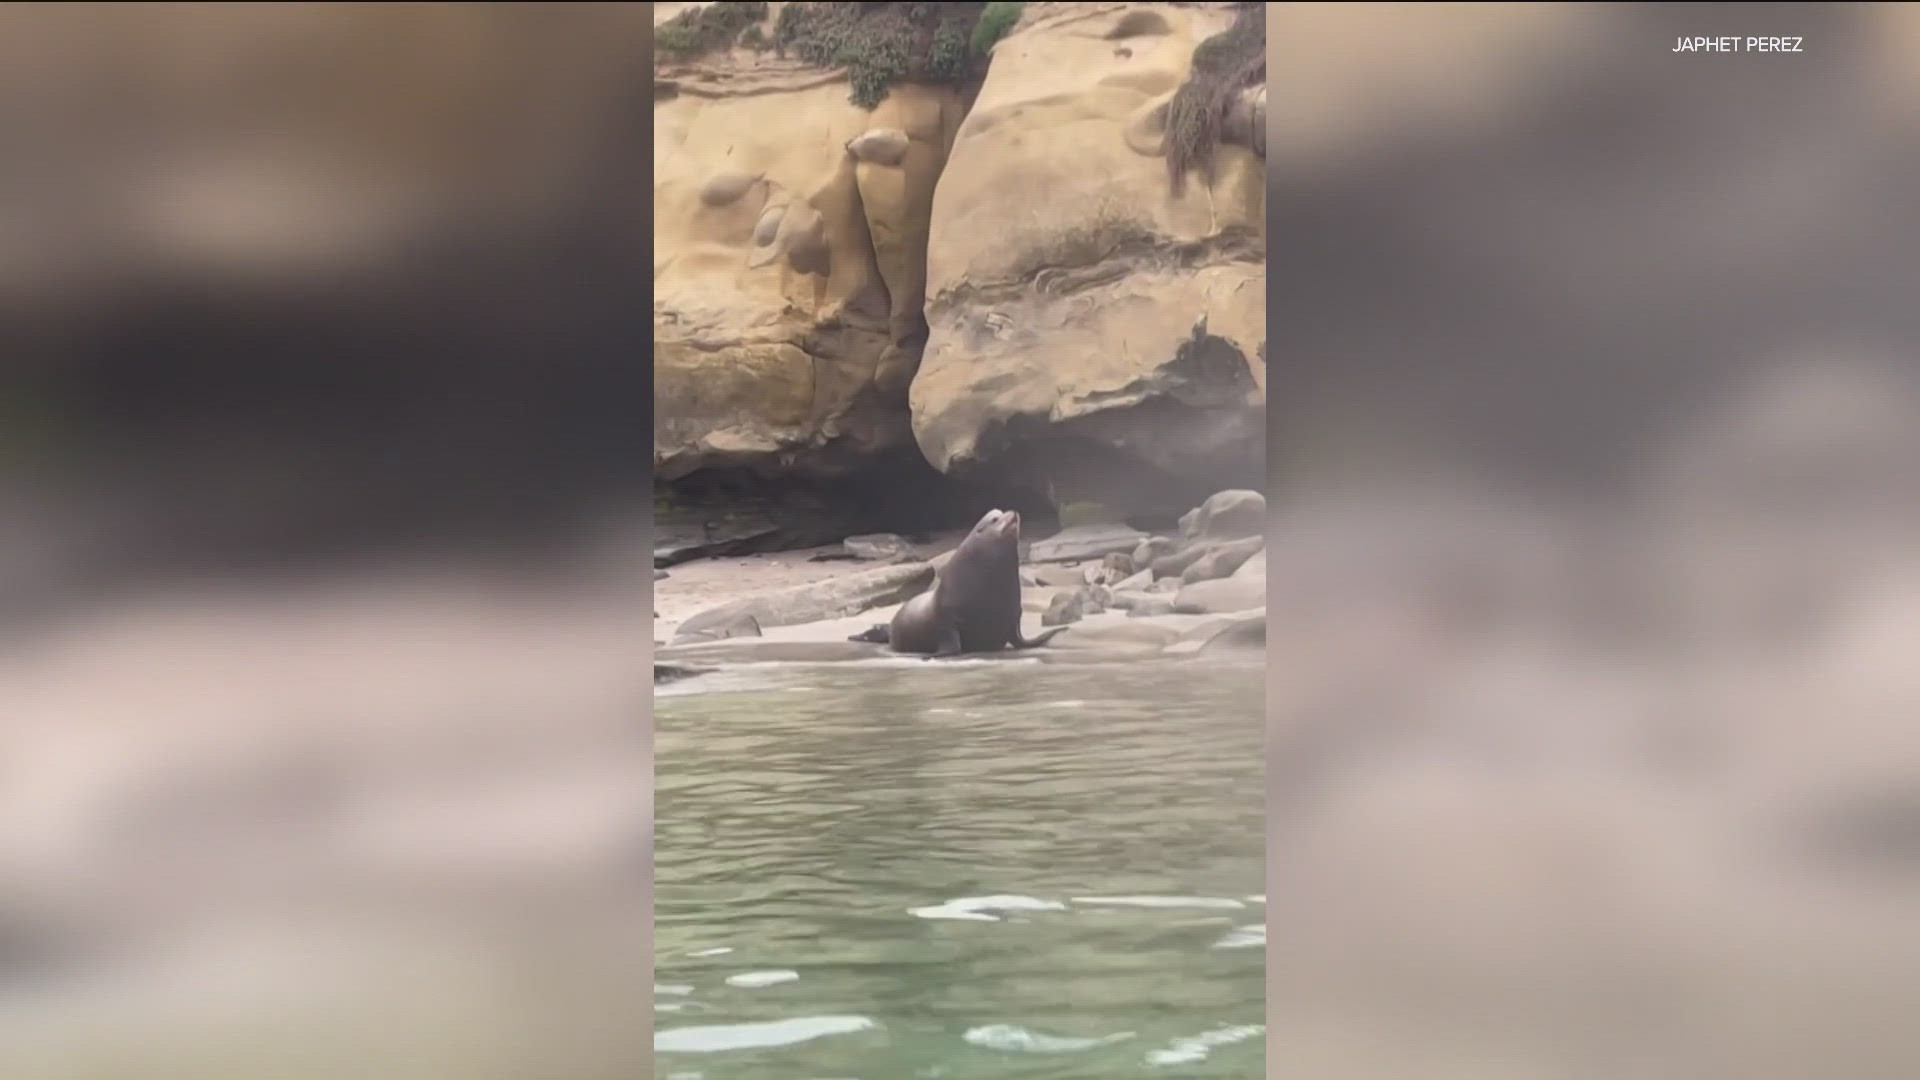 People at La Jolla Cove were startled as two sea lions charged at each other and began barking at beachgoers.